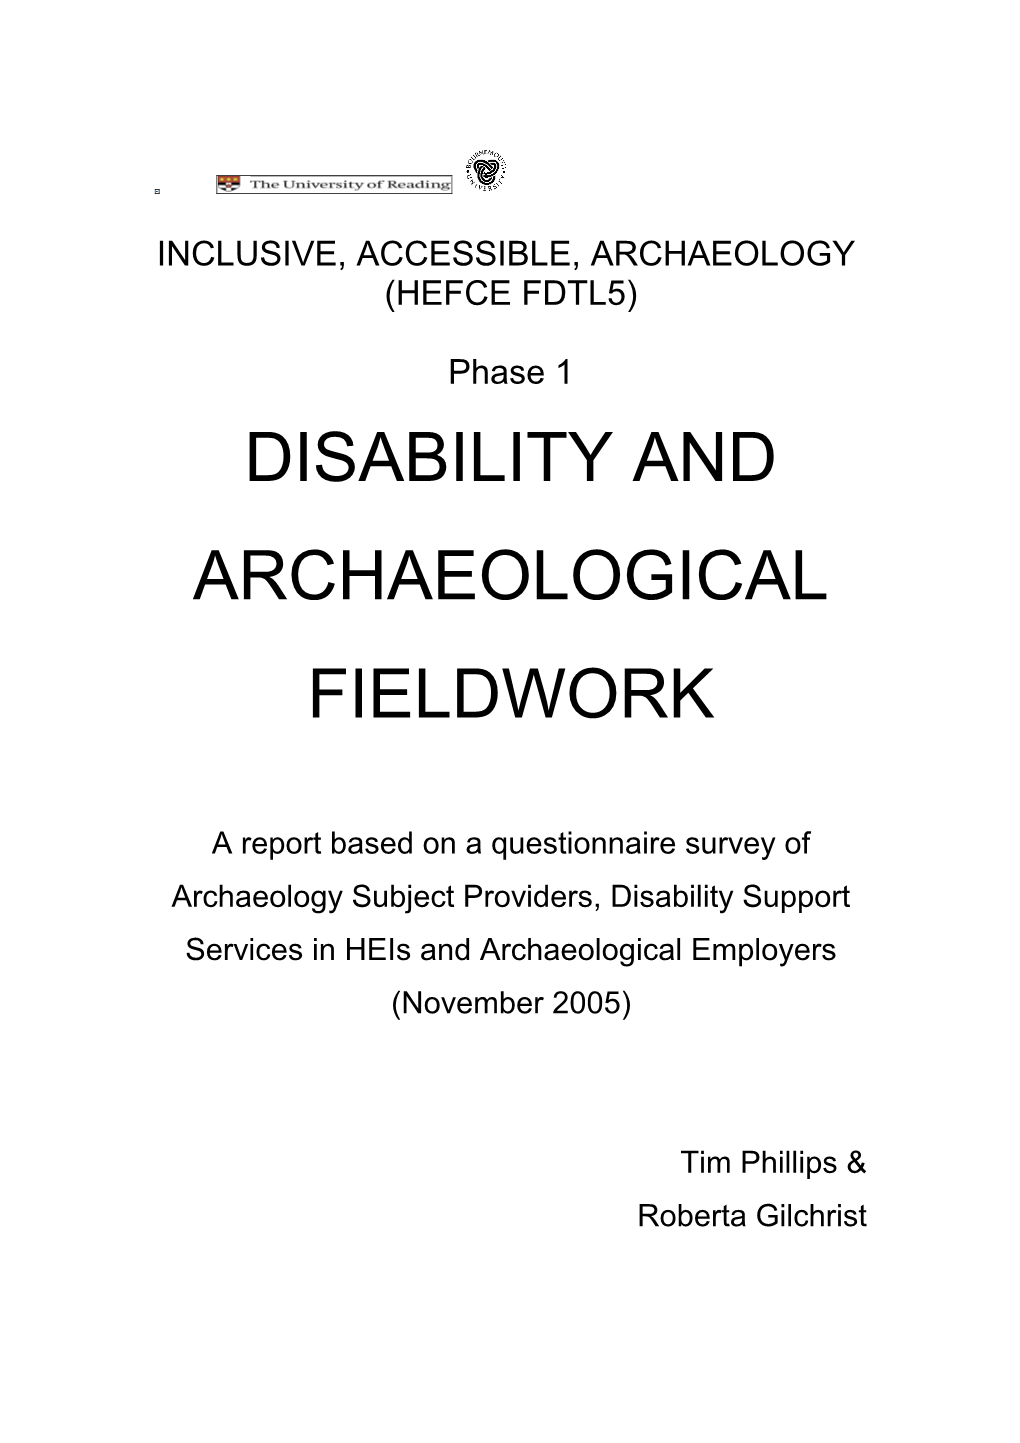 Results of the Archaeology Subject Providers Questionnaire